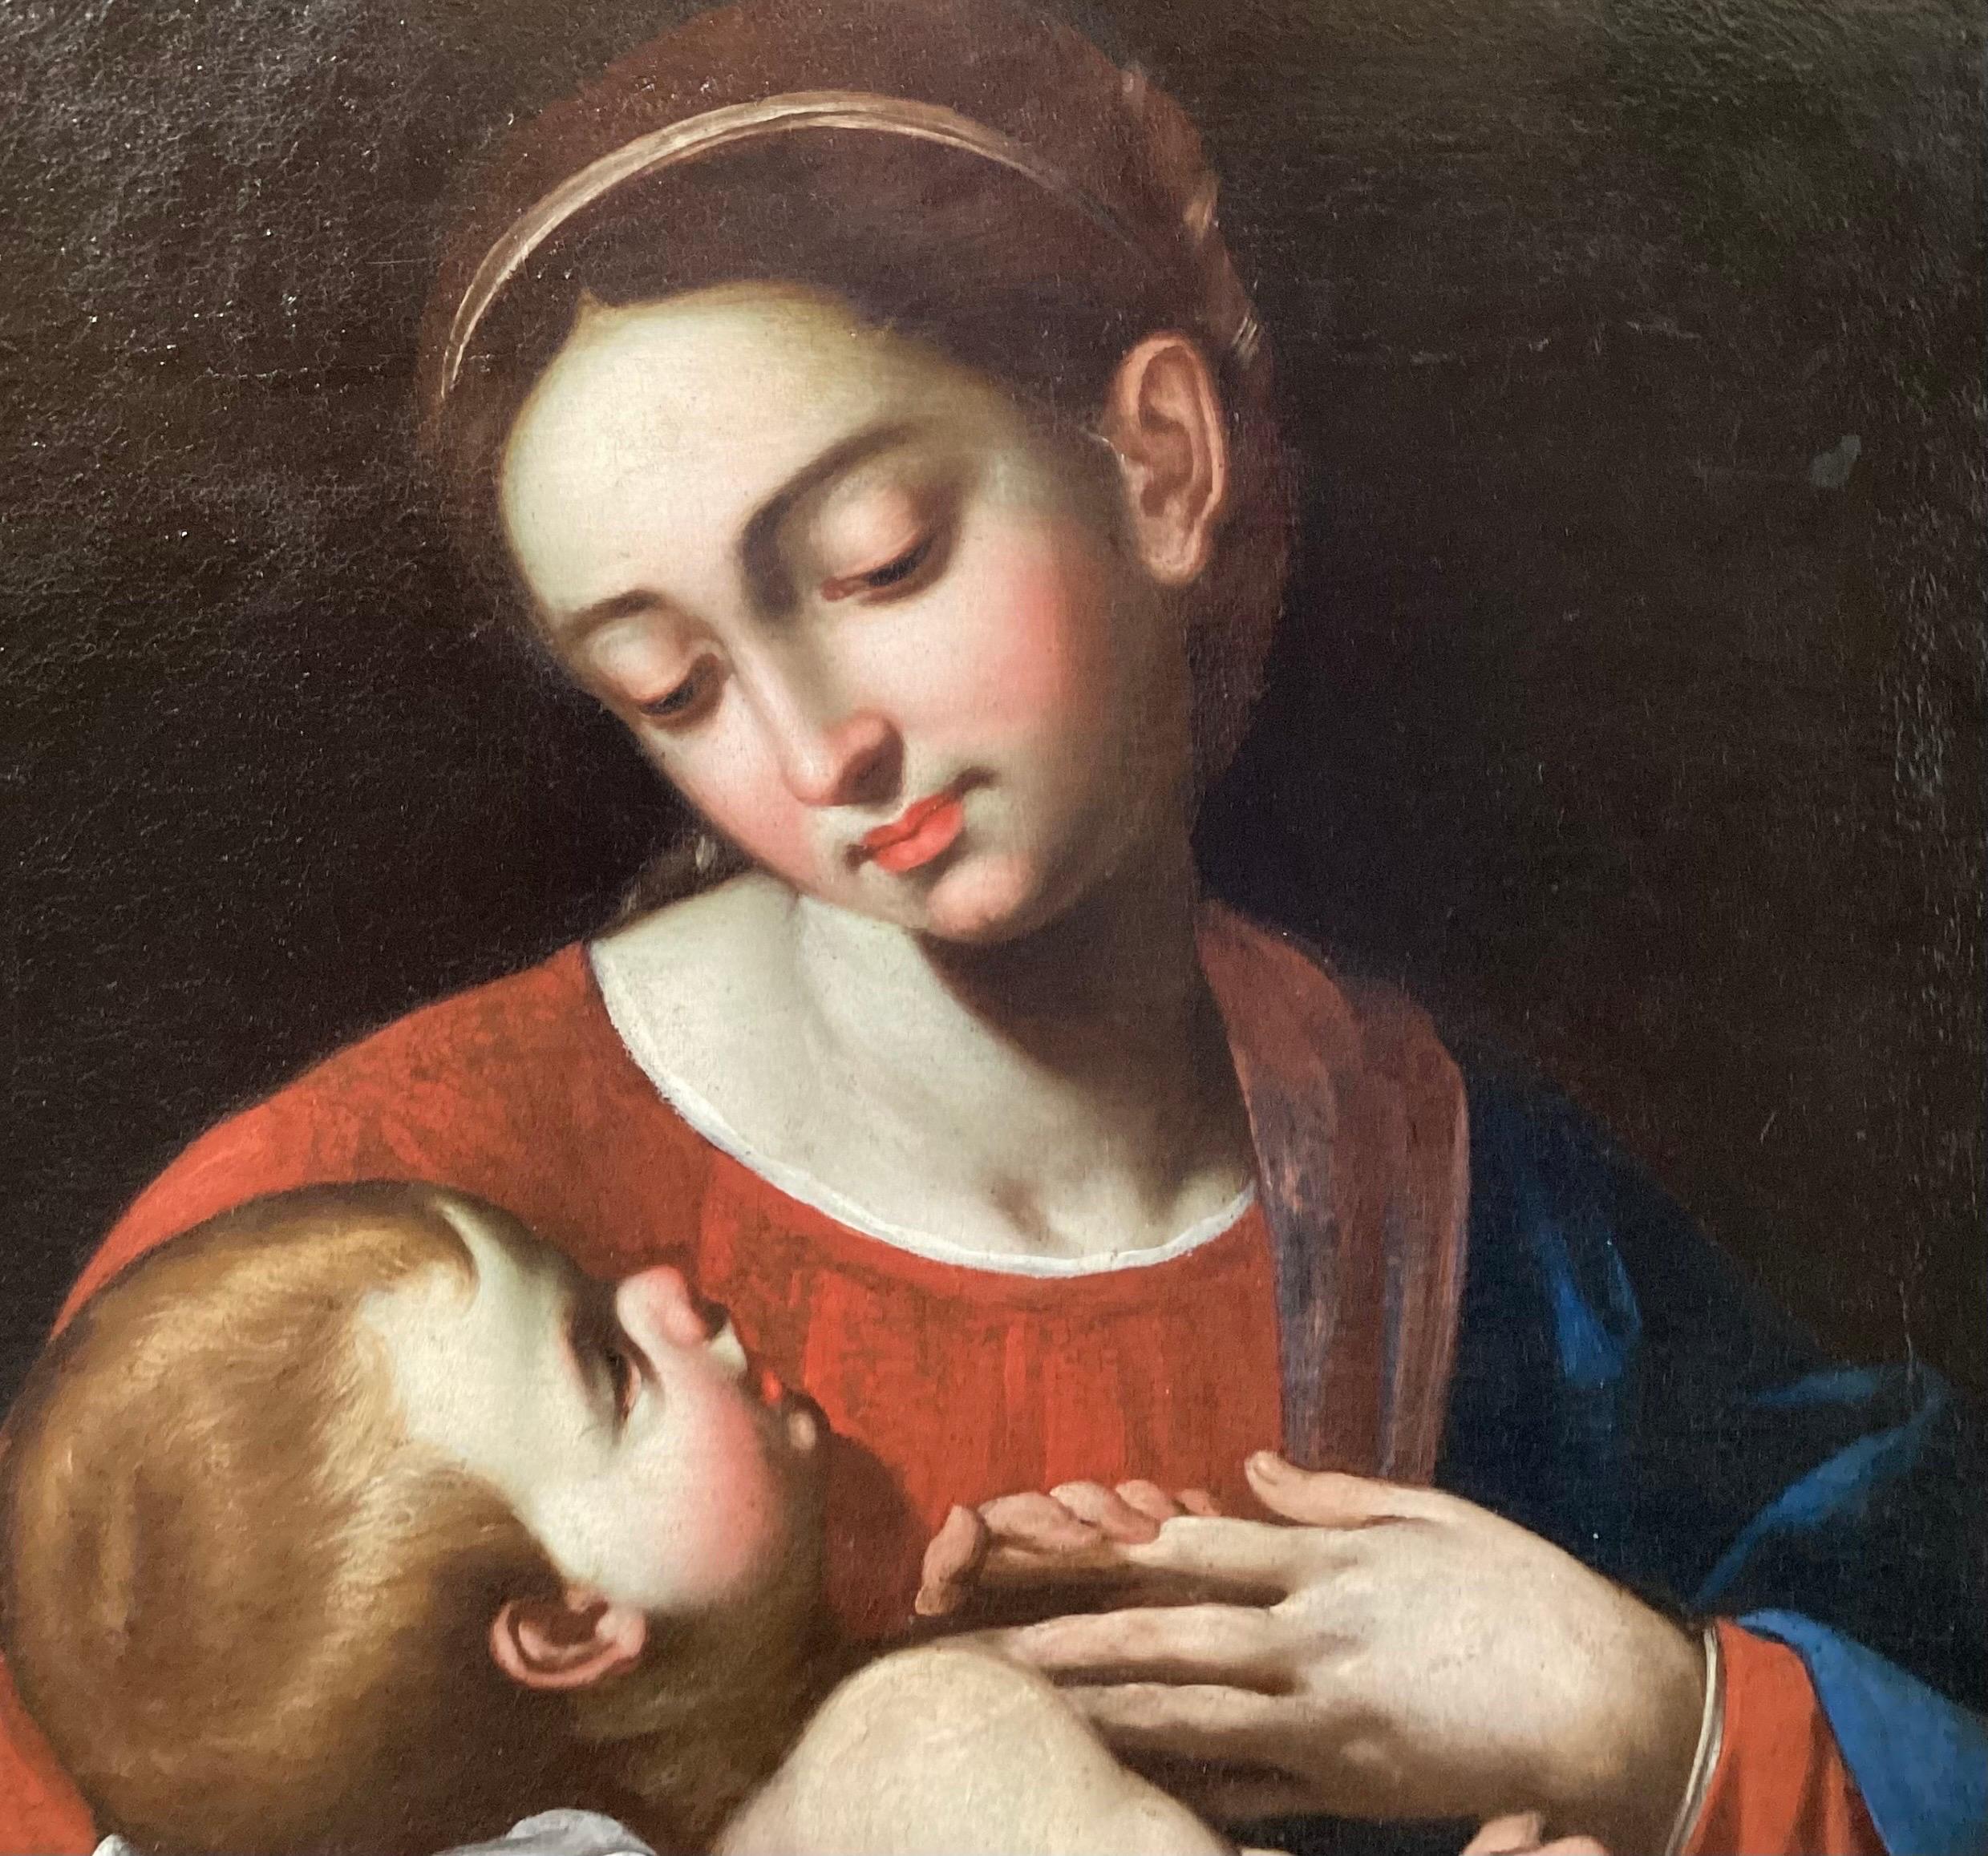 A 17th Century Italian old master painting of Madonna and Child.  The early painting has been cleaned, restreached and relined and has an early frame that may or may not be original.  The painting is bright and the colors vibrant with the recent